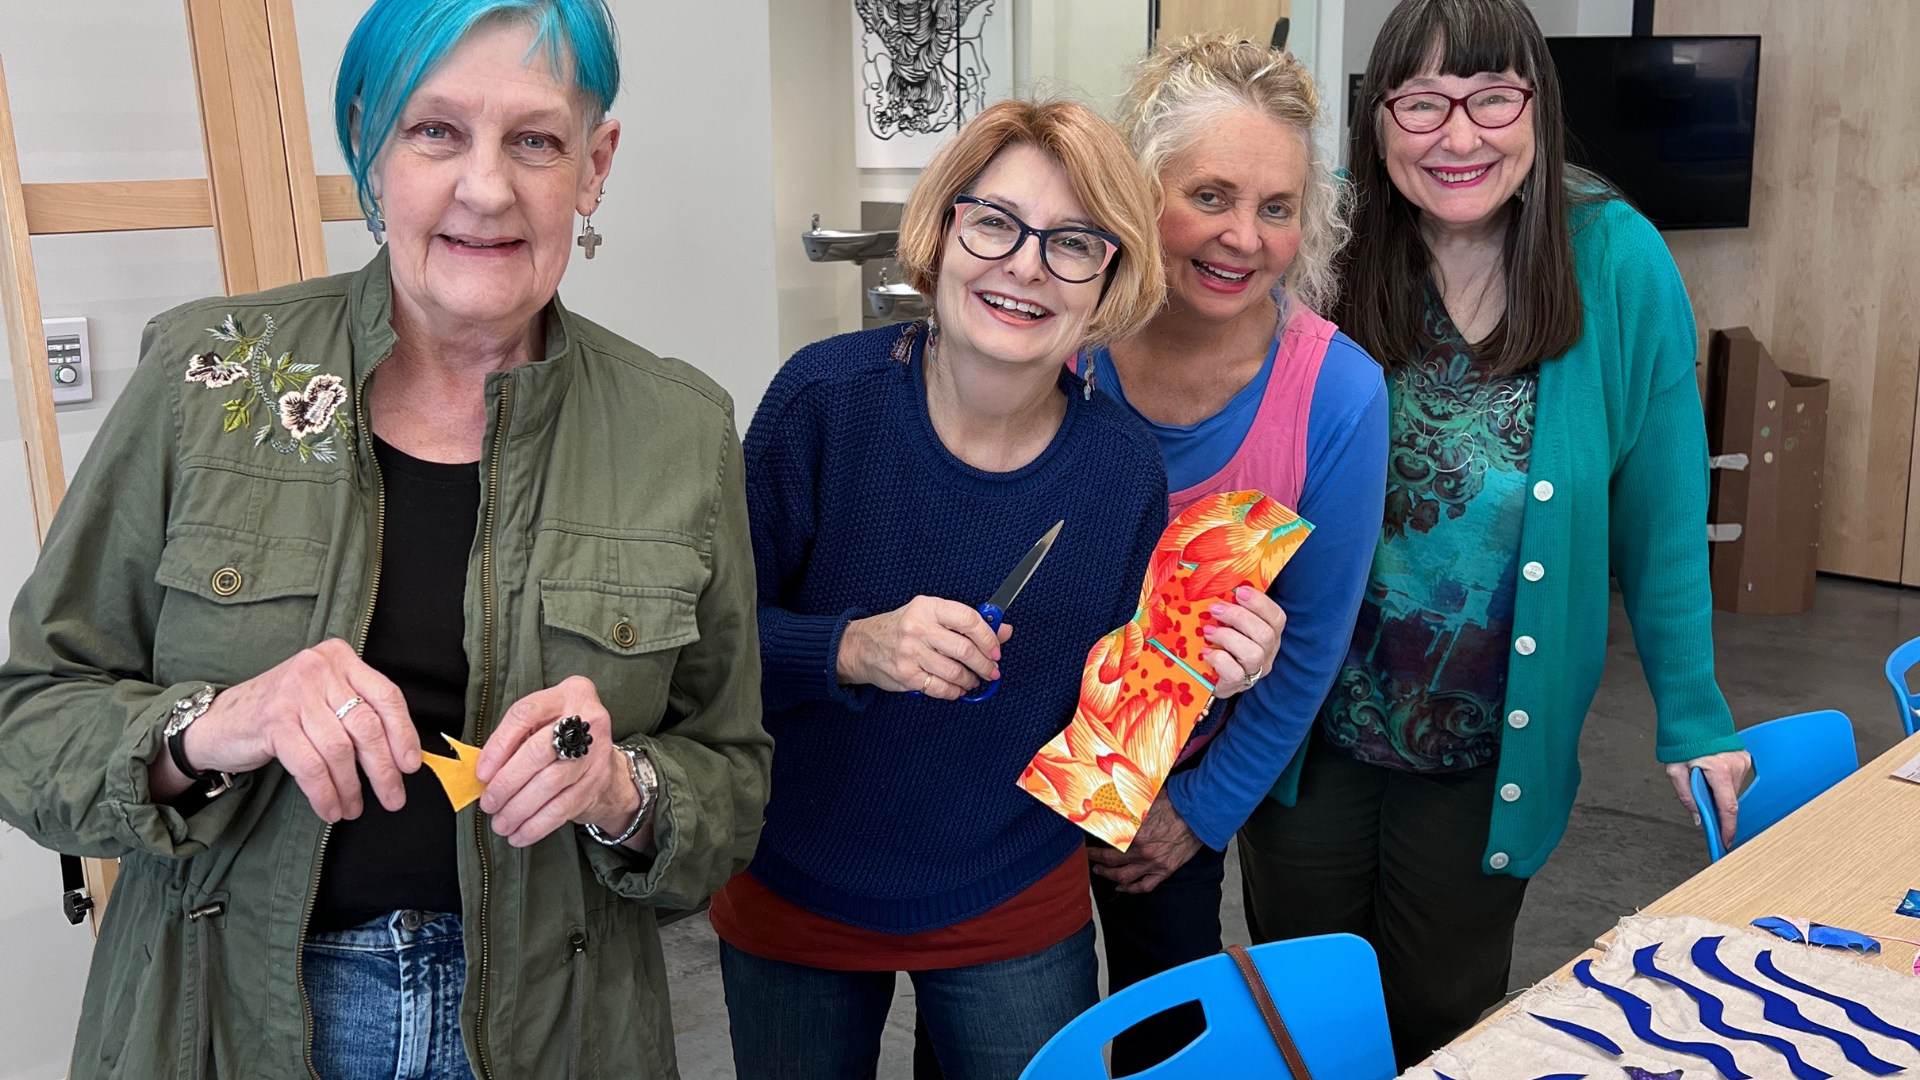 Four women standing by a table with crafts on it and smiling.